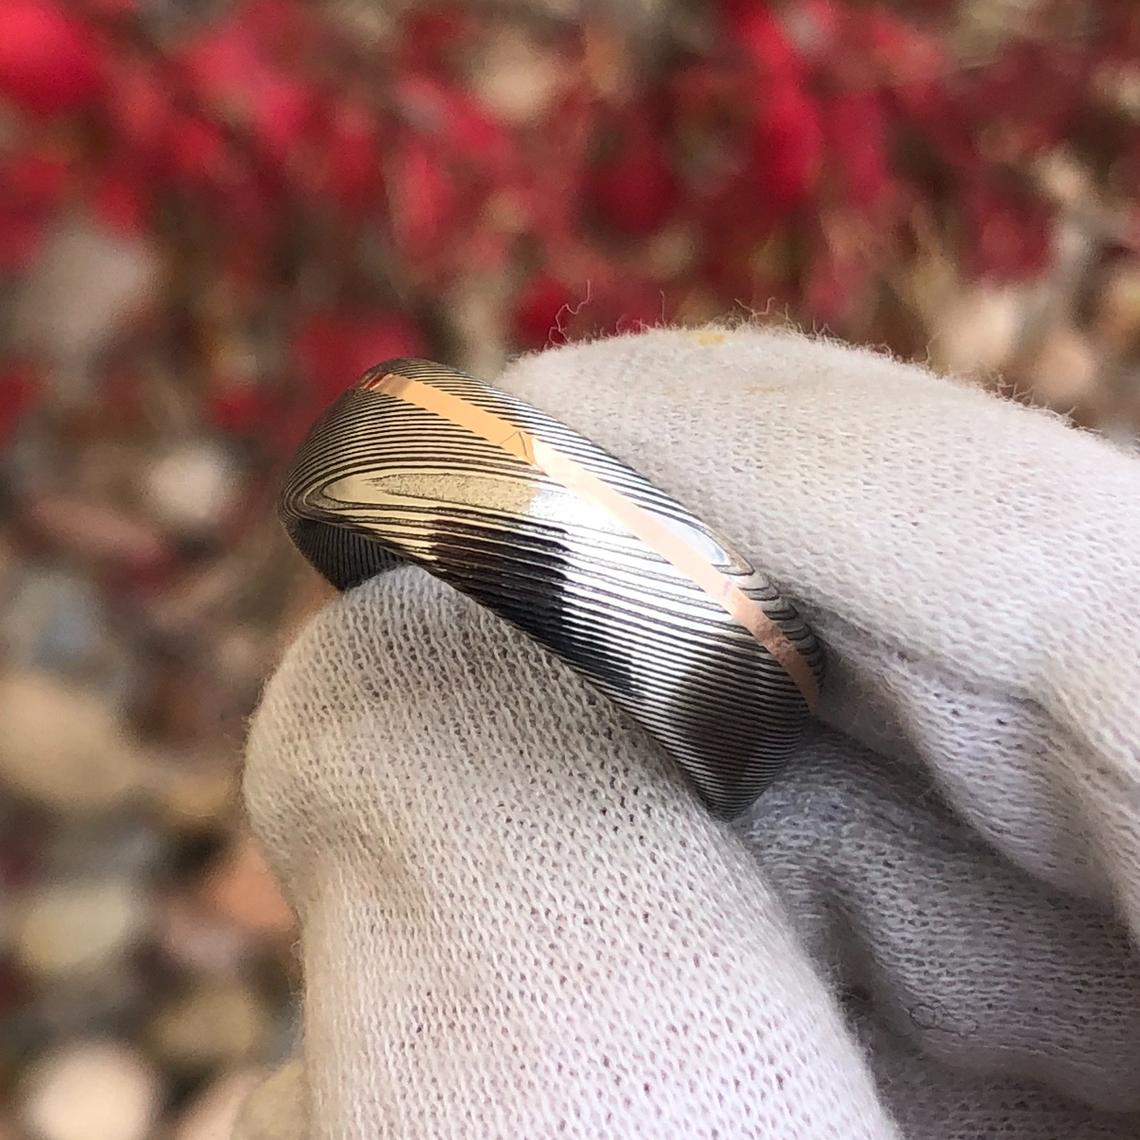 8mm wide Damascus steel ring with an off-centered  rose gold inlay